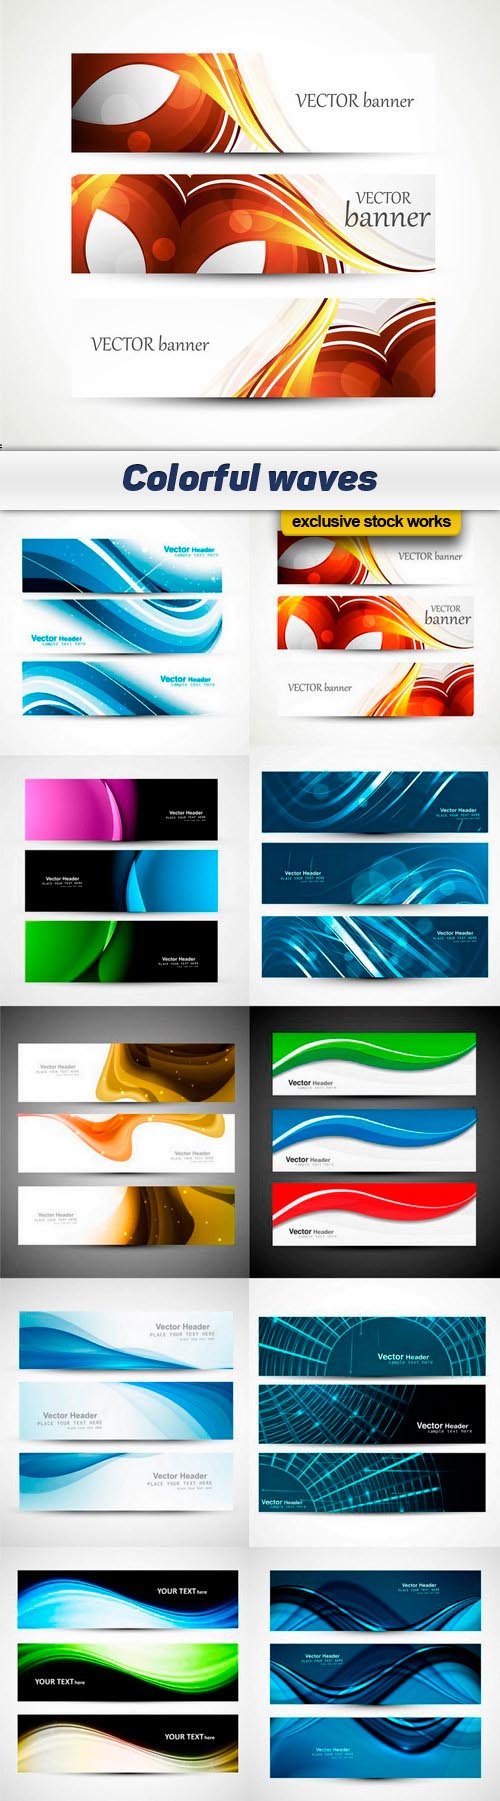 Colorful waves - 10 EPS